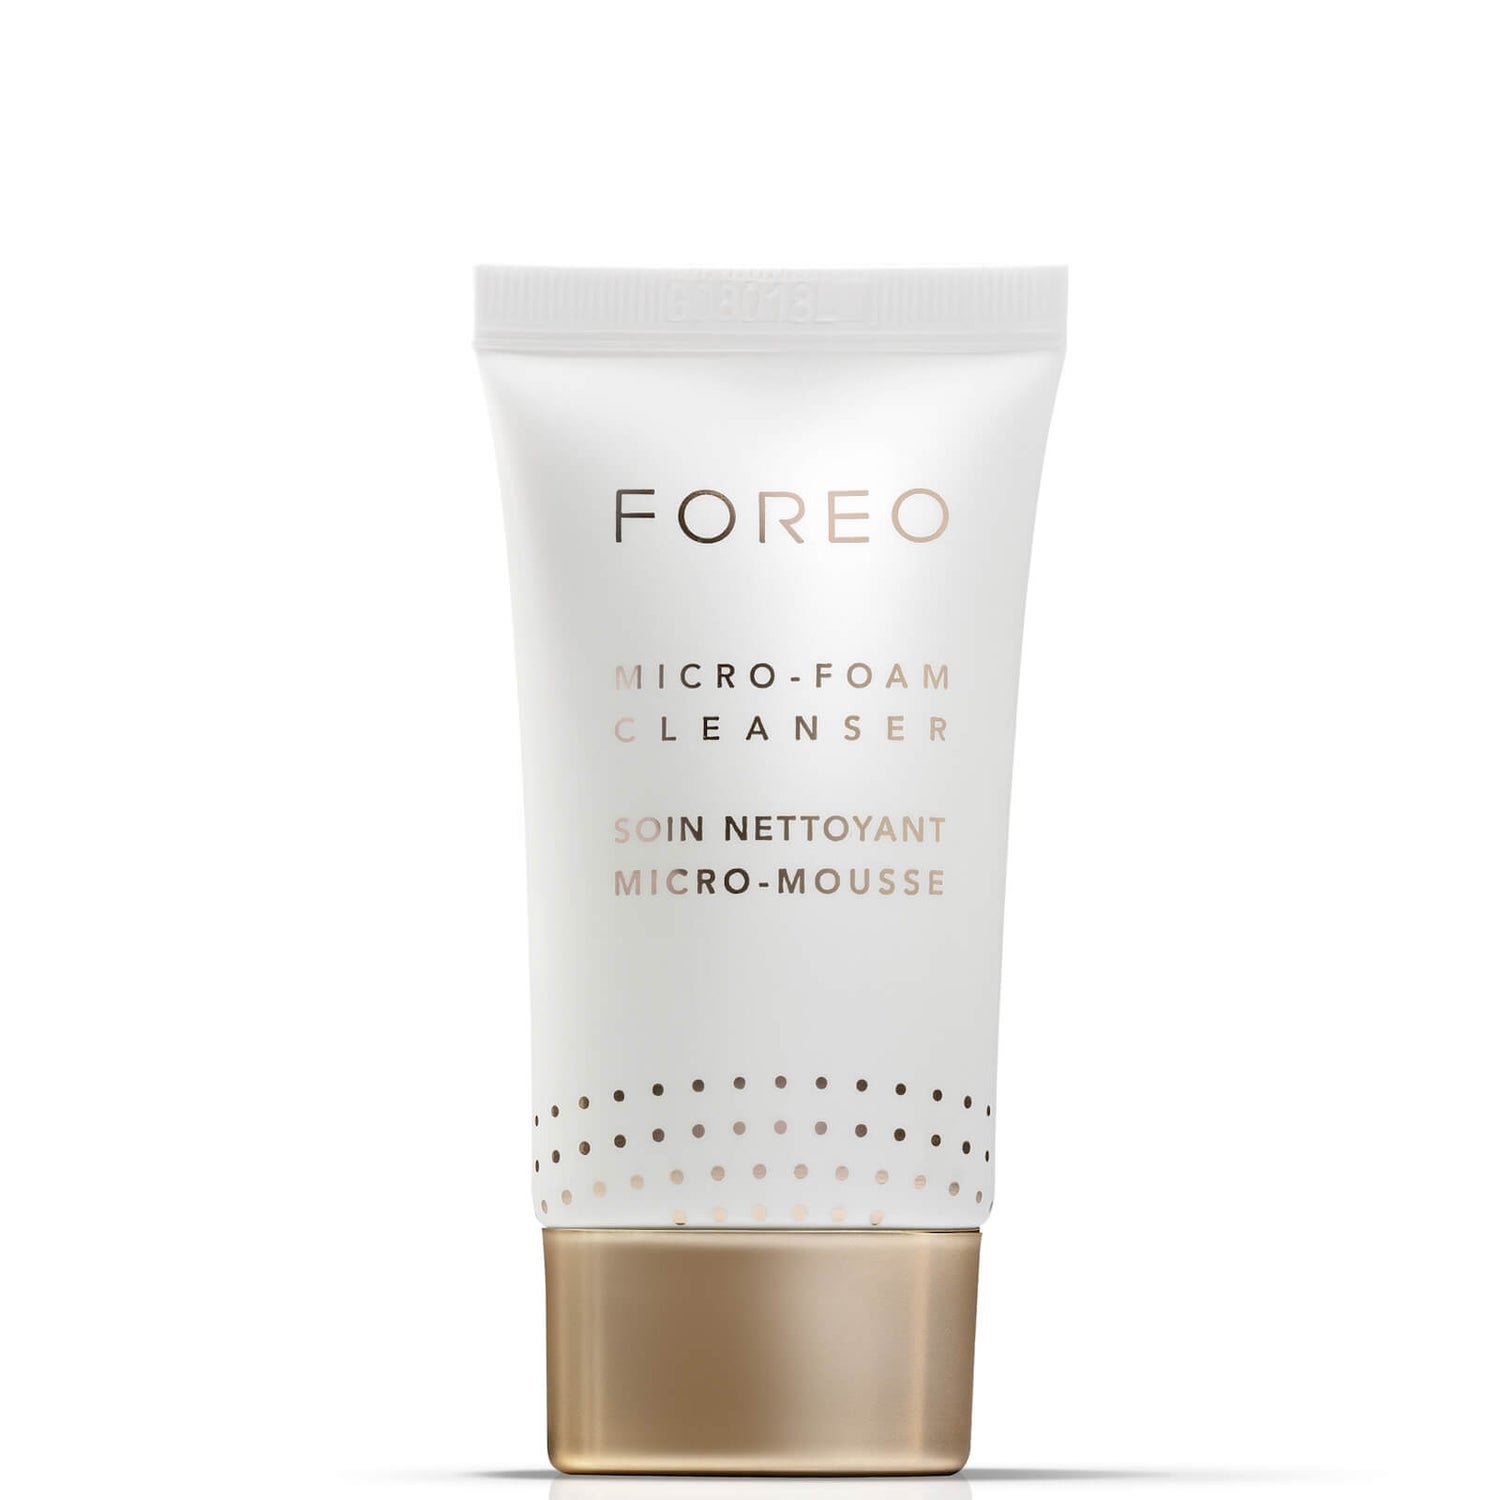 FOREO Cruelty-Free and Vegan Micro-Foam Cleanser (Various Sizes) - 20ml